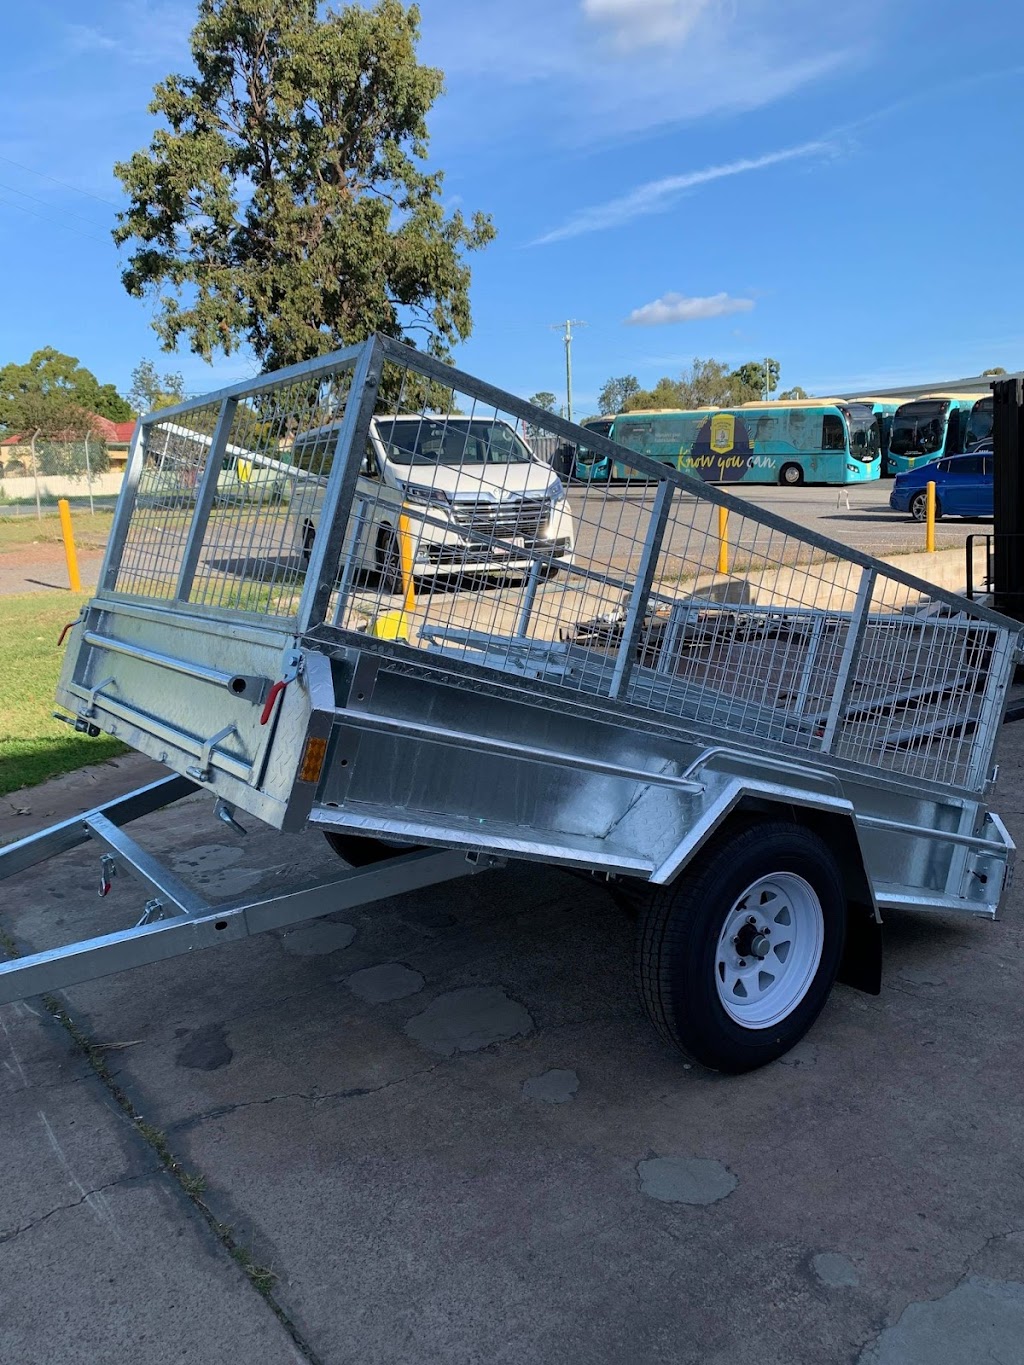 Solid World Shelving and Trailer Shop | Shed 2/16 Jacob St, Dinmore QLD 4303, Australia | Phone: (07) 3282 3715